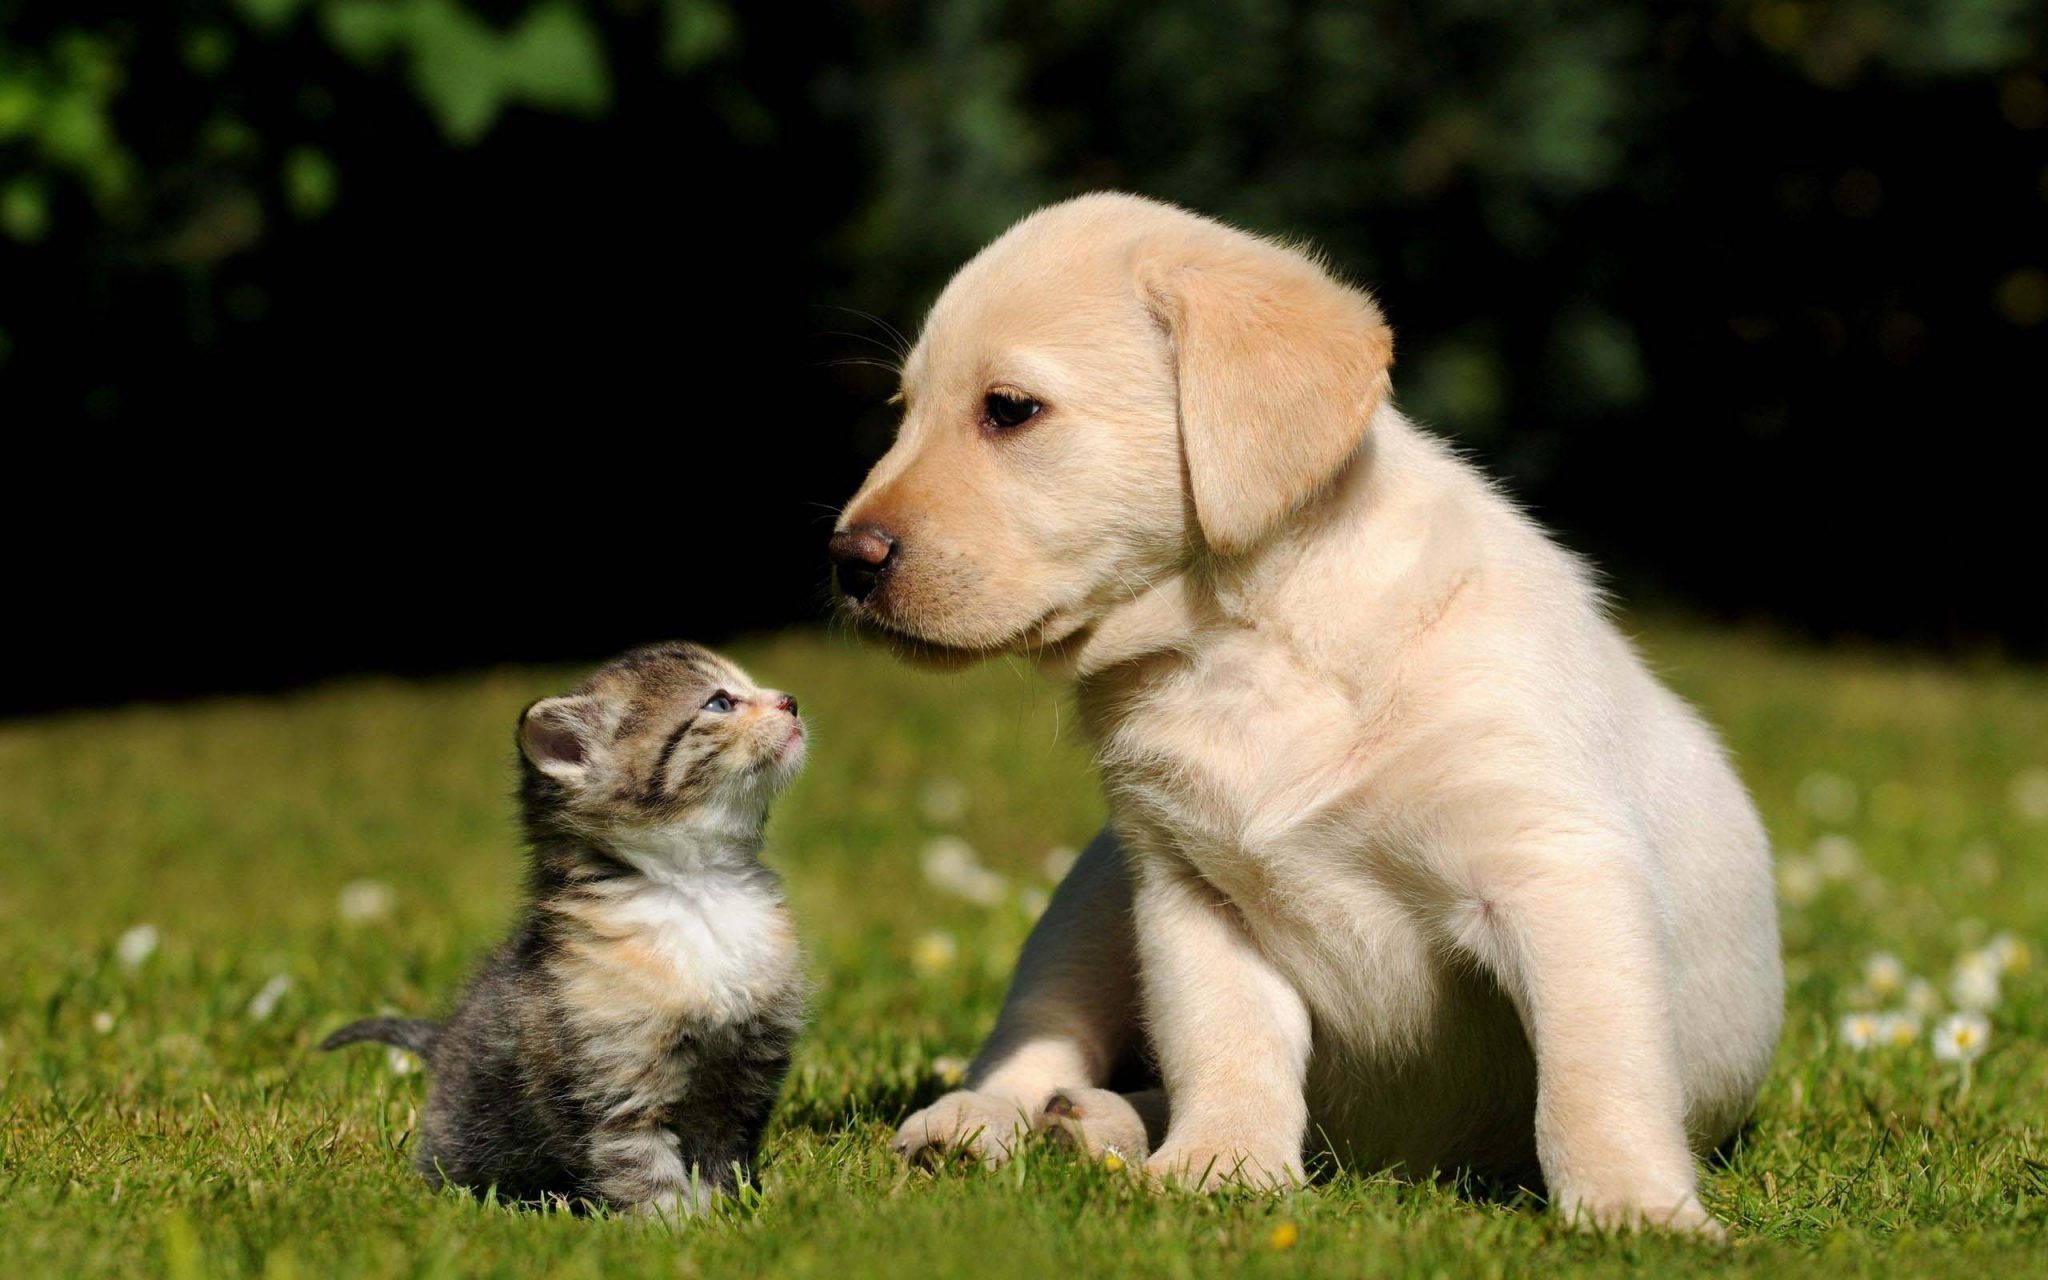 Baby Dog And Cat Wallpapers - Wallpaper Cave